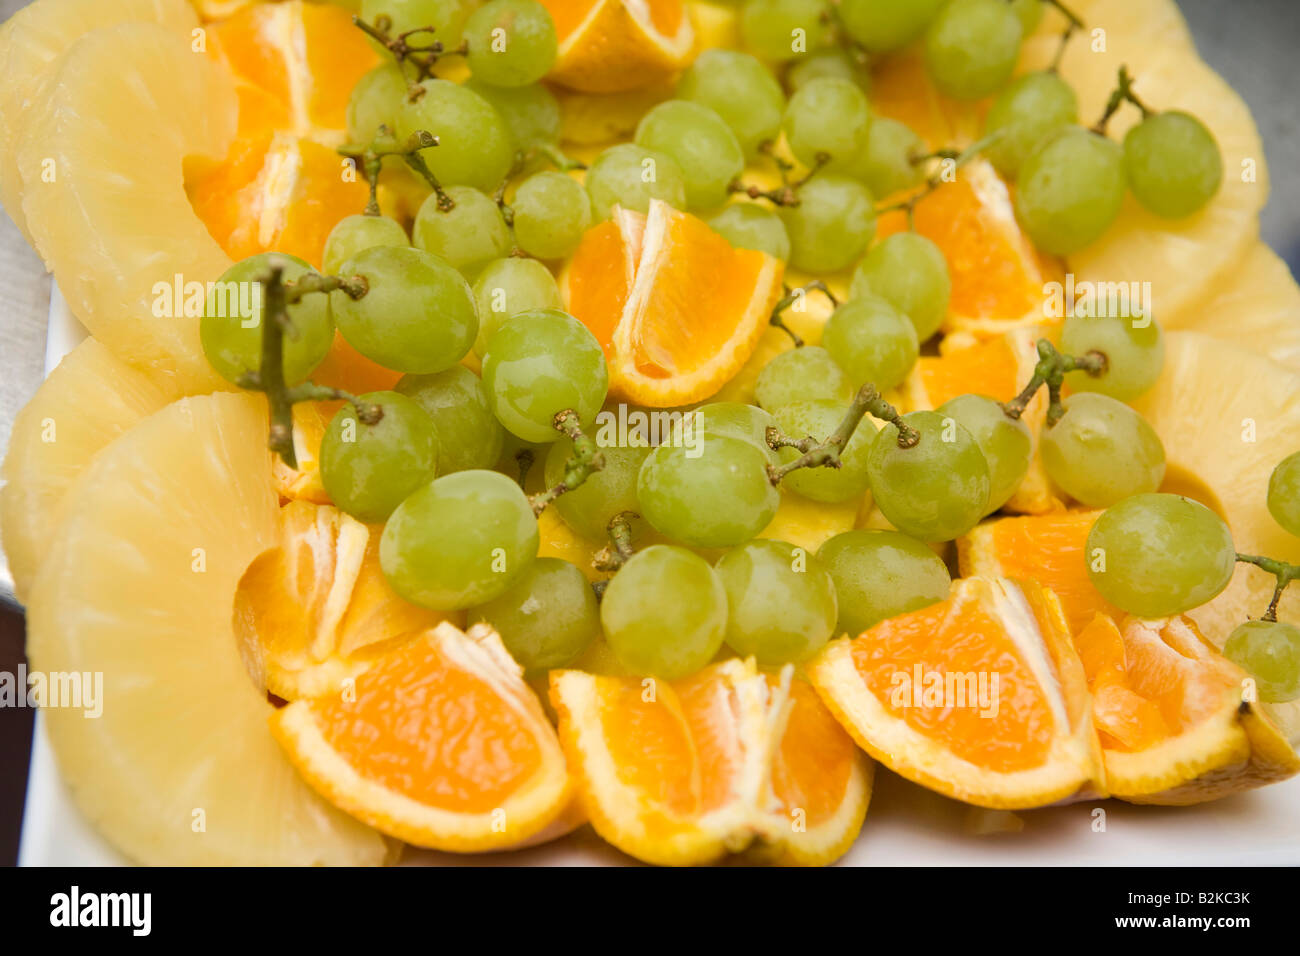 School Meals plate of fresh mixed fruit salad Stock Photo